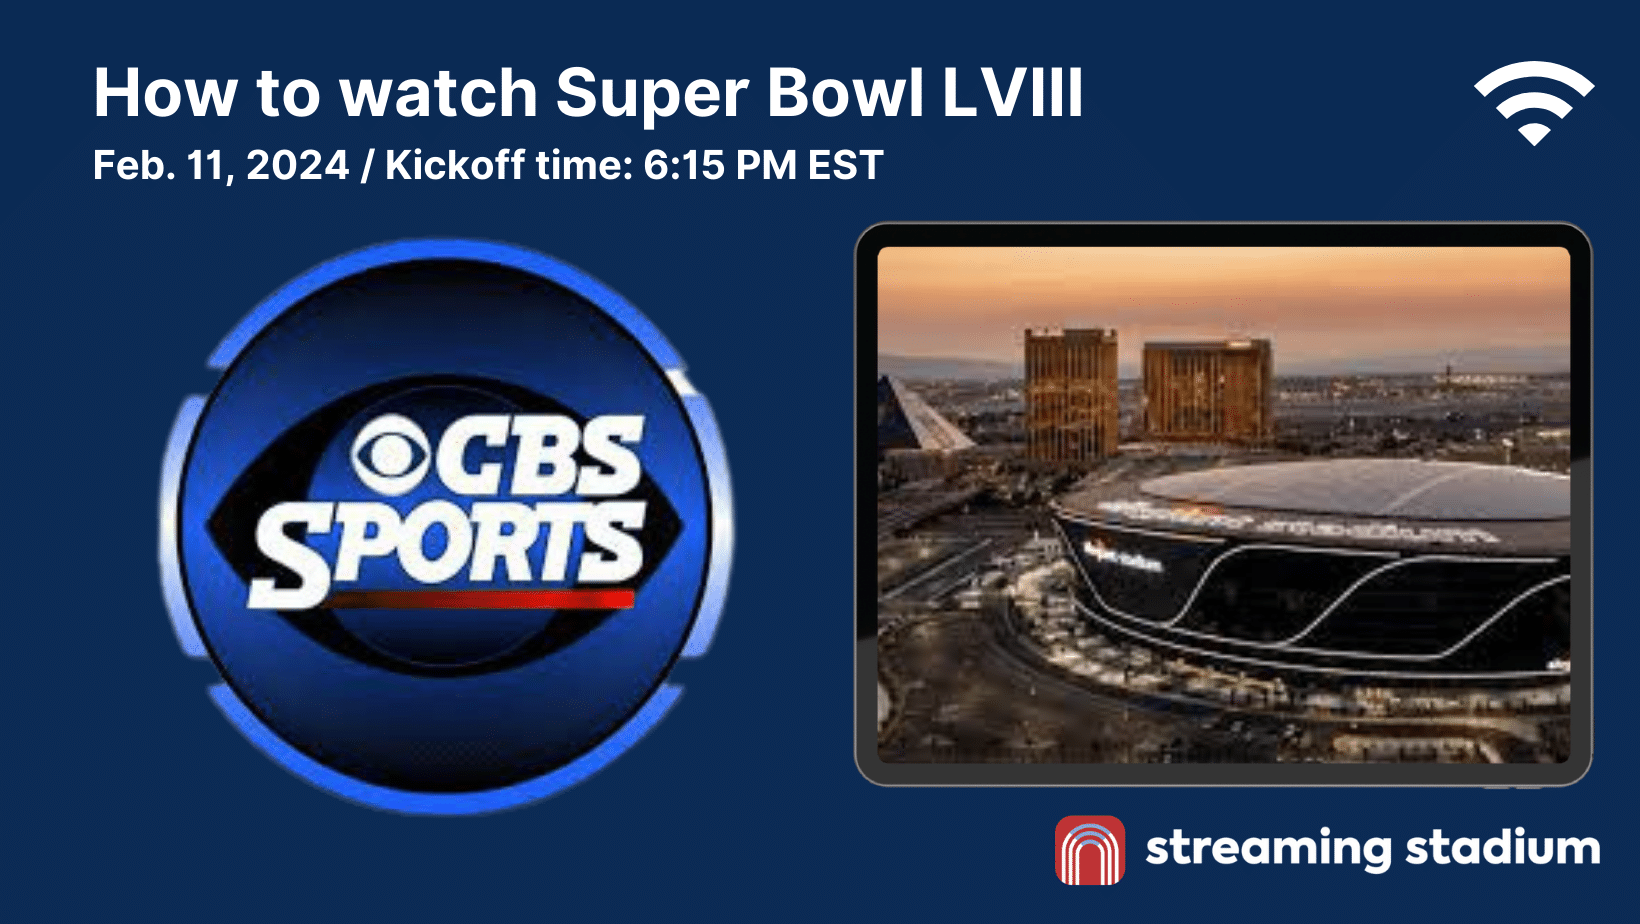 Super Bowl LVIII 2024: When and Where Is the Game?